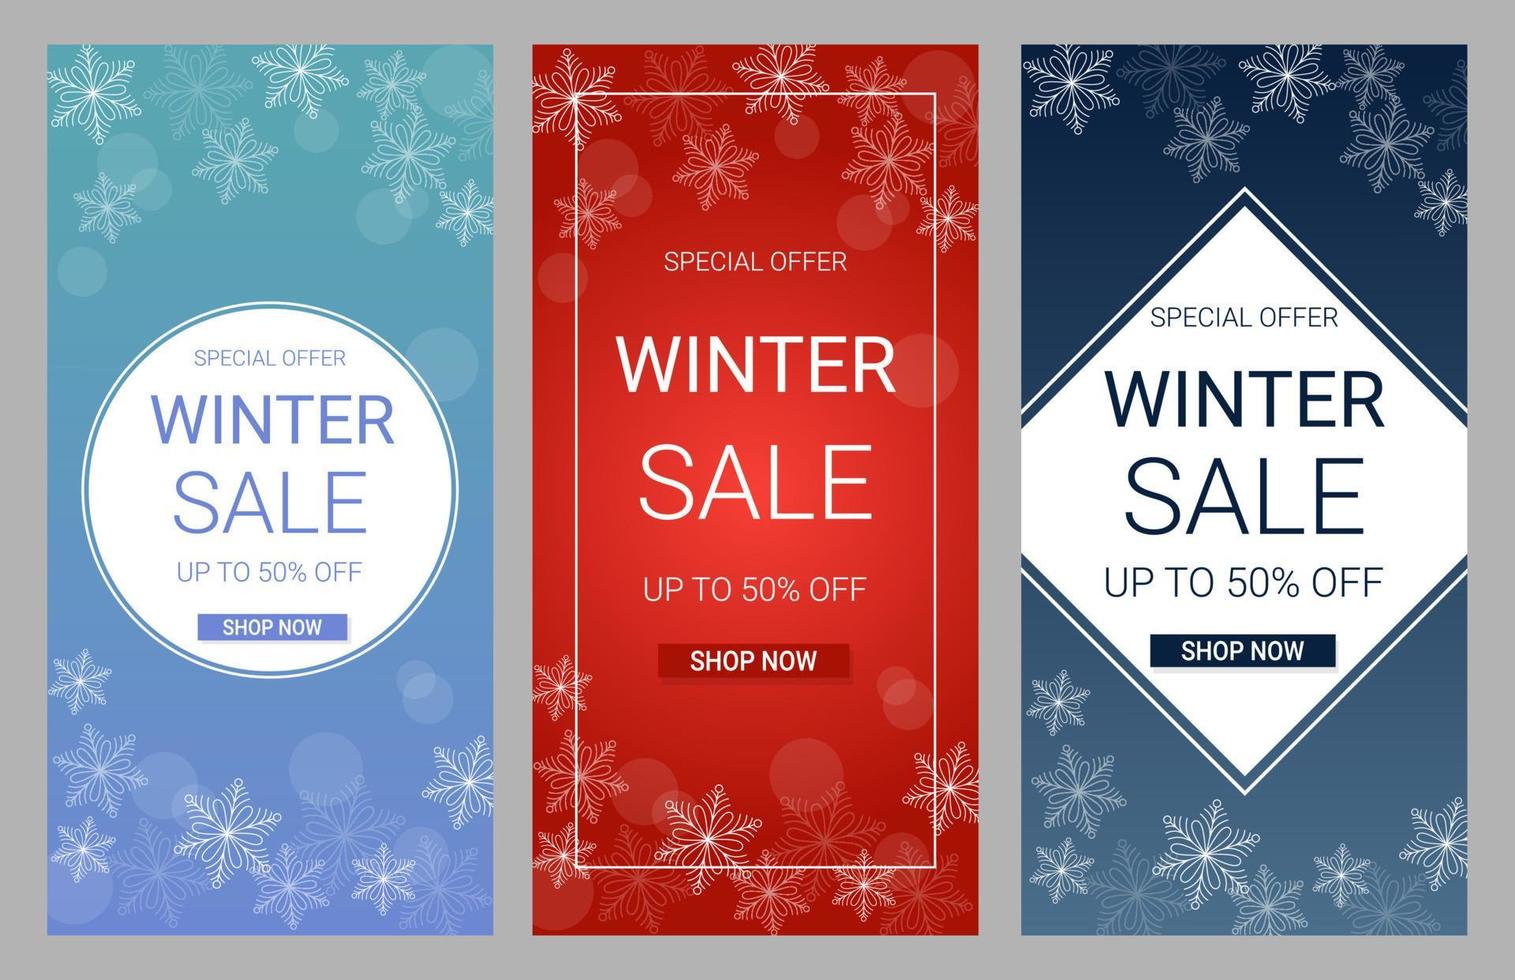 Set of winter sale vertical banners. Discount text on blue, red gradient background with snowflakes vector